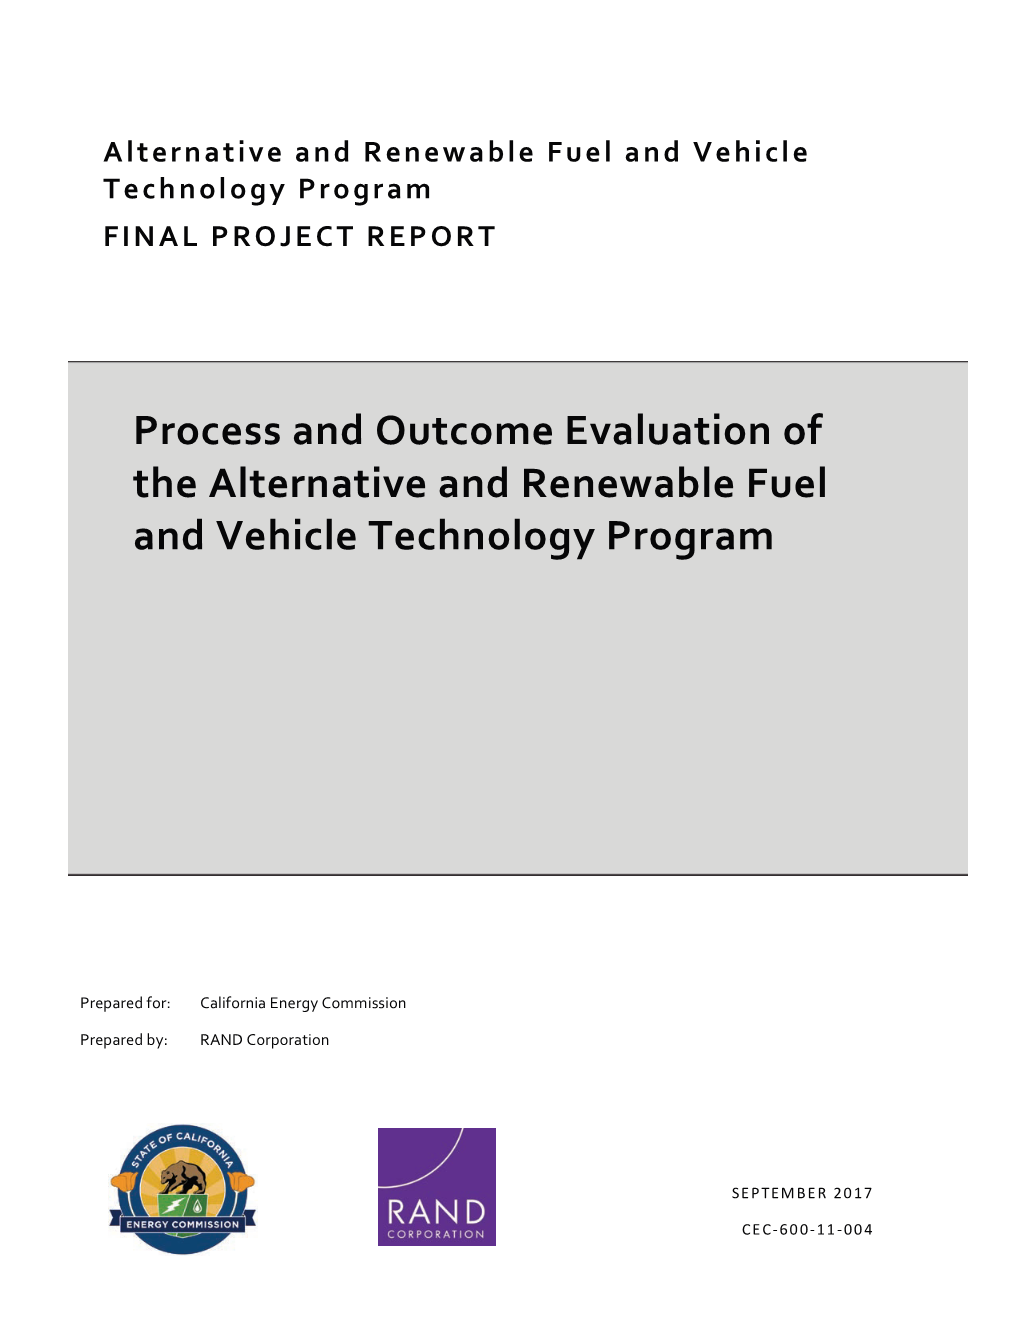 Process and Outcome Evaluation of the Alternative and Renewable Fuel and Vehicle Technology Program